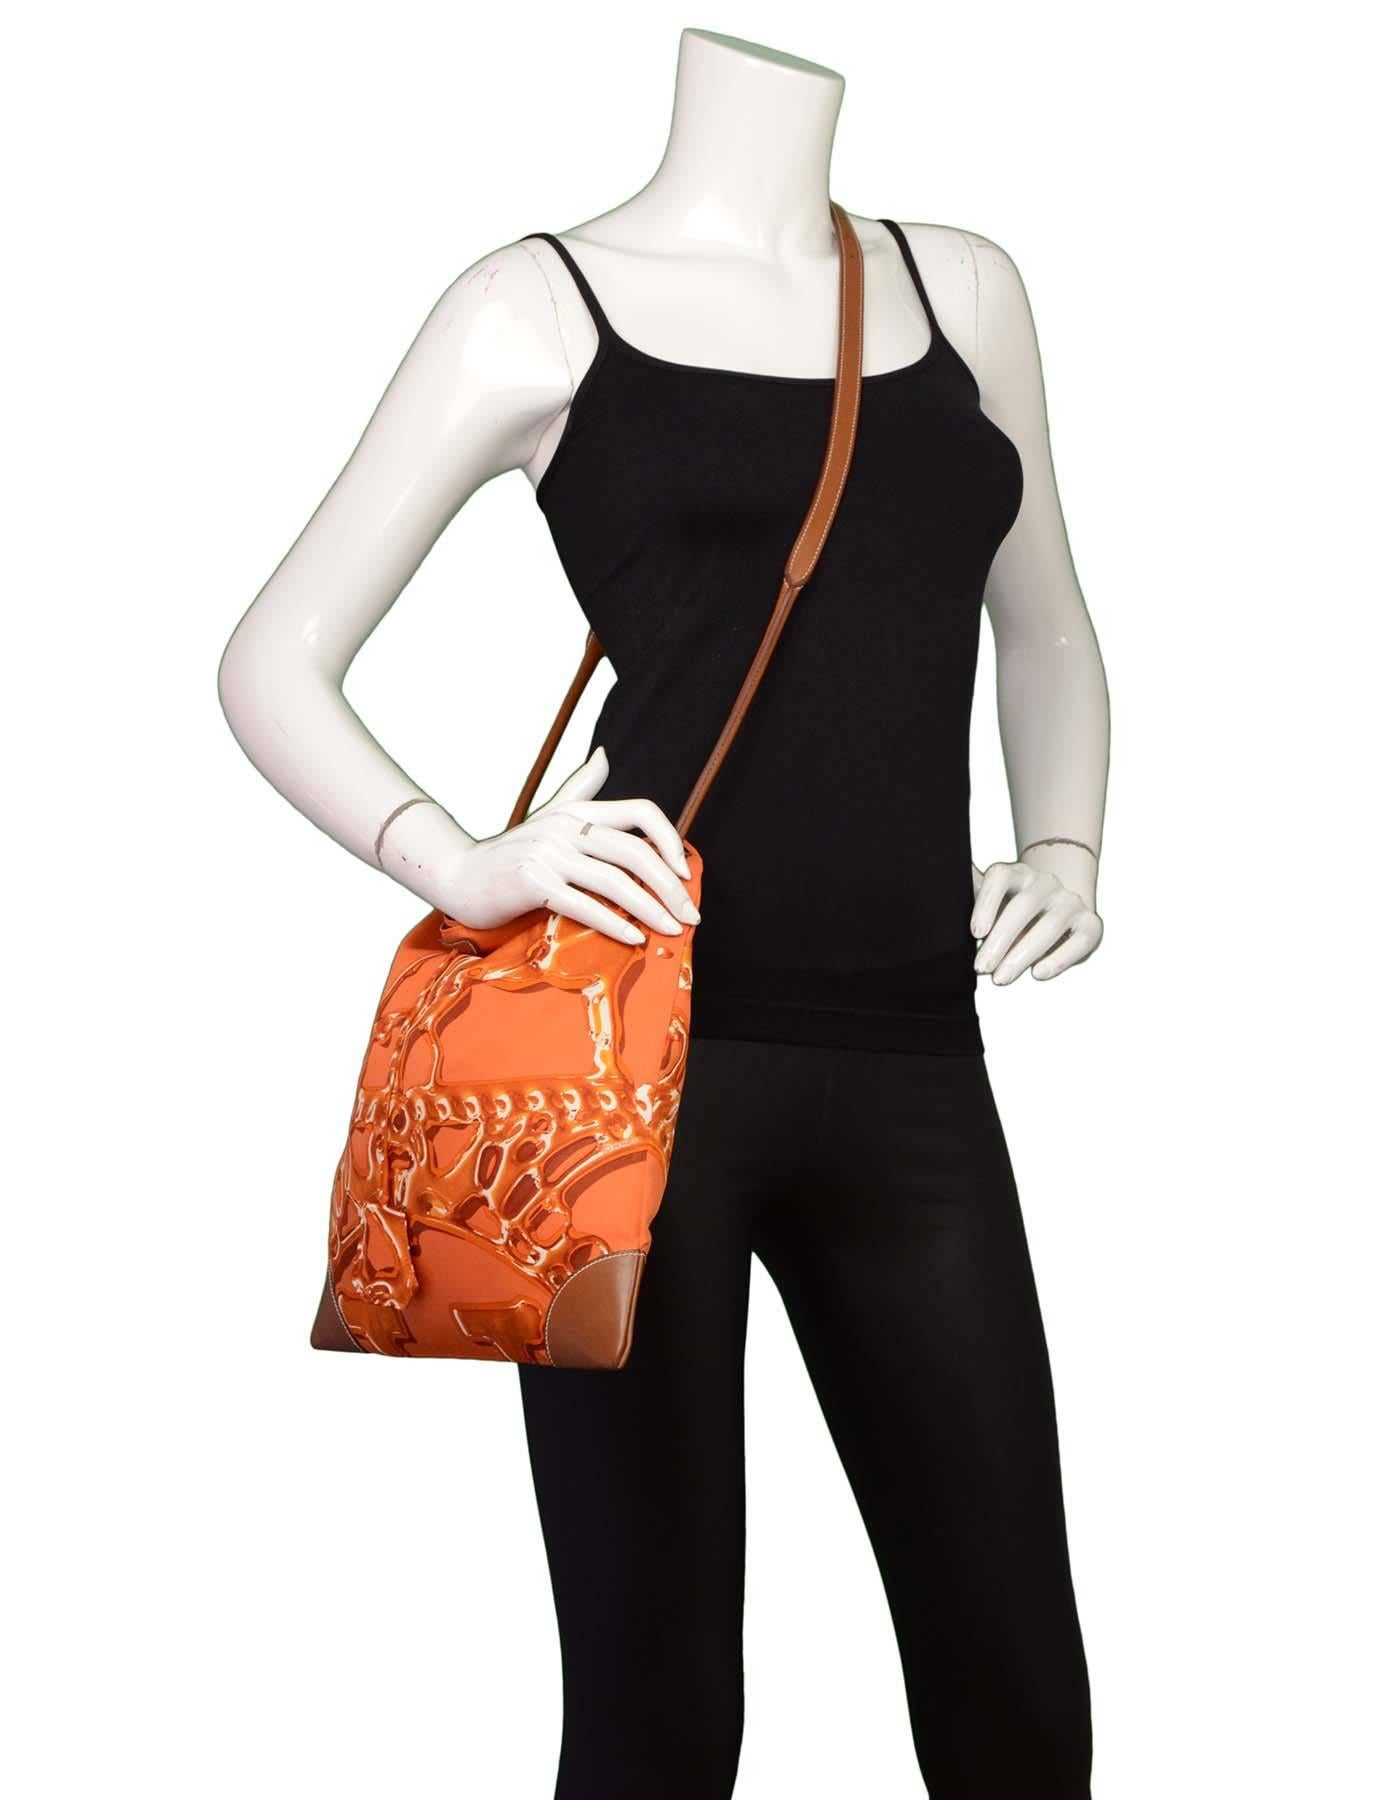 Hermes Orange and Brown Silky City PM Messenger Bag

Features attached zip pouch at interior

Made in: France
Year of Production: 2011
Color: Brown and orange
Hardware: Palladium
Materials: Silk, barenia calfskin
Lining: